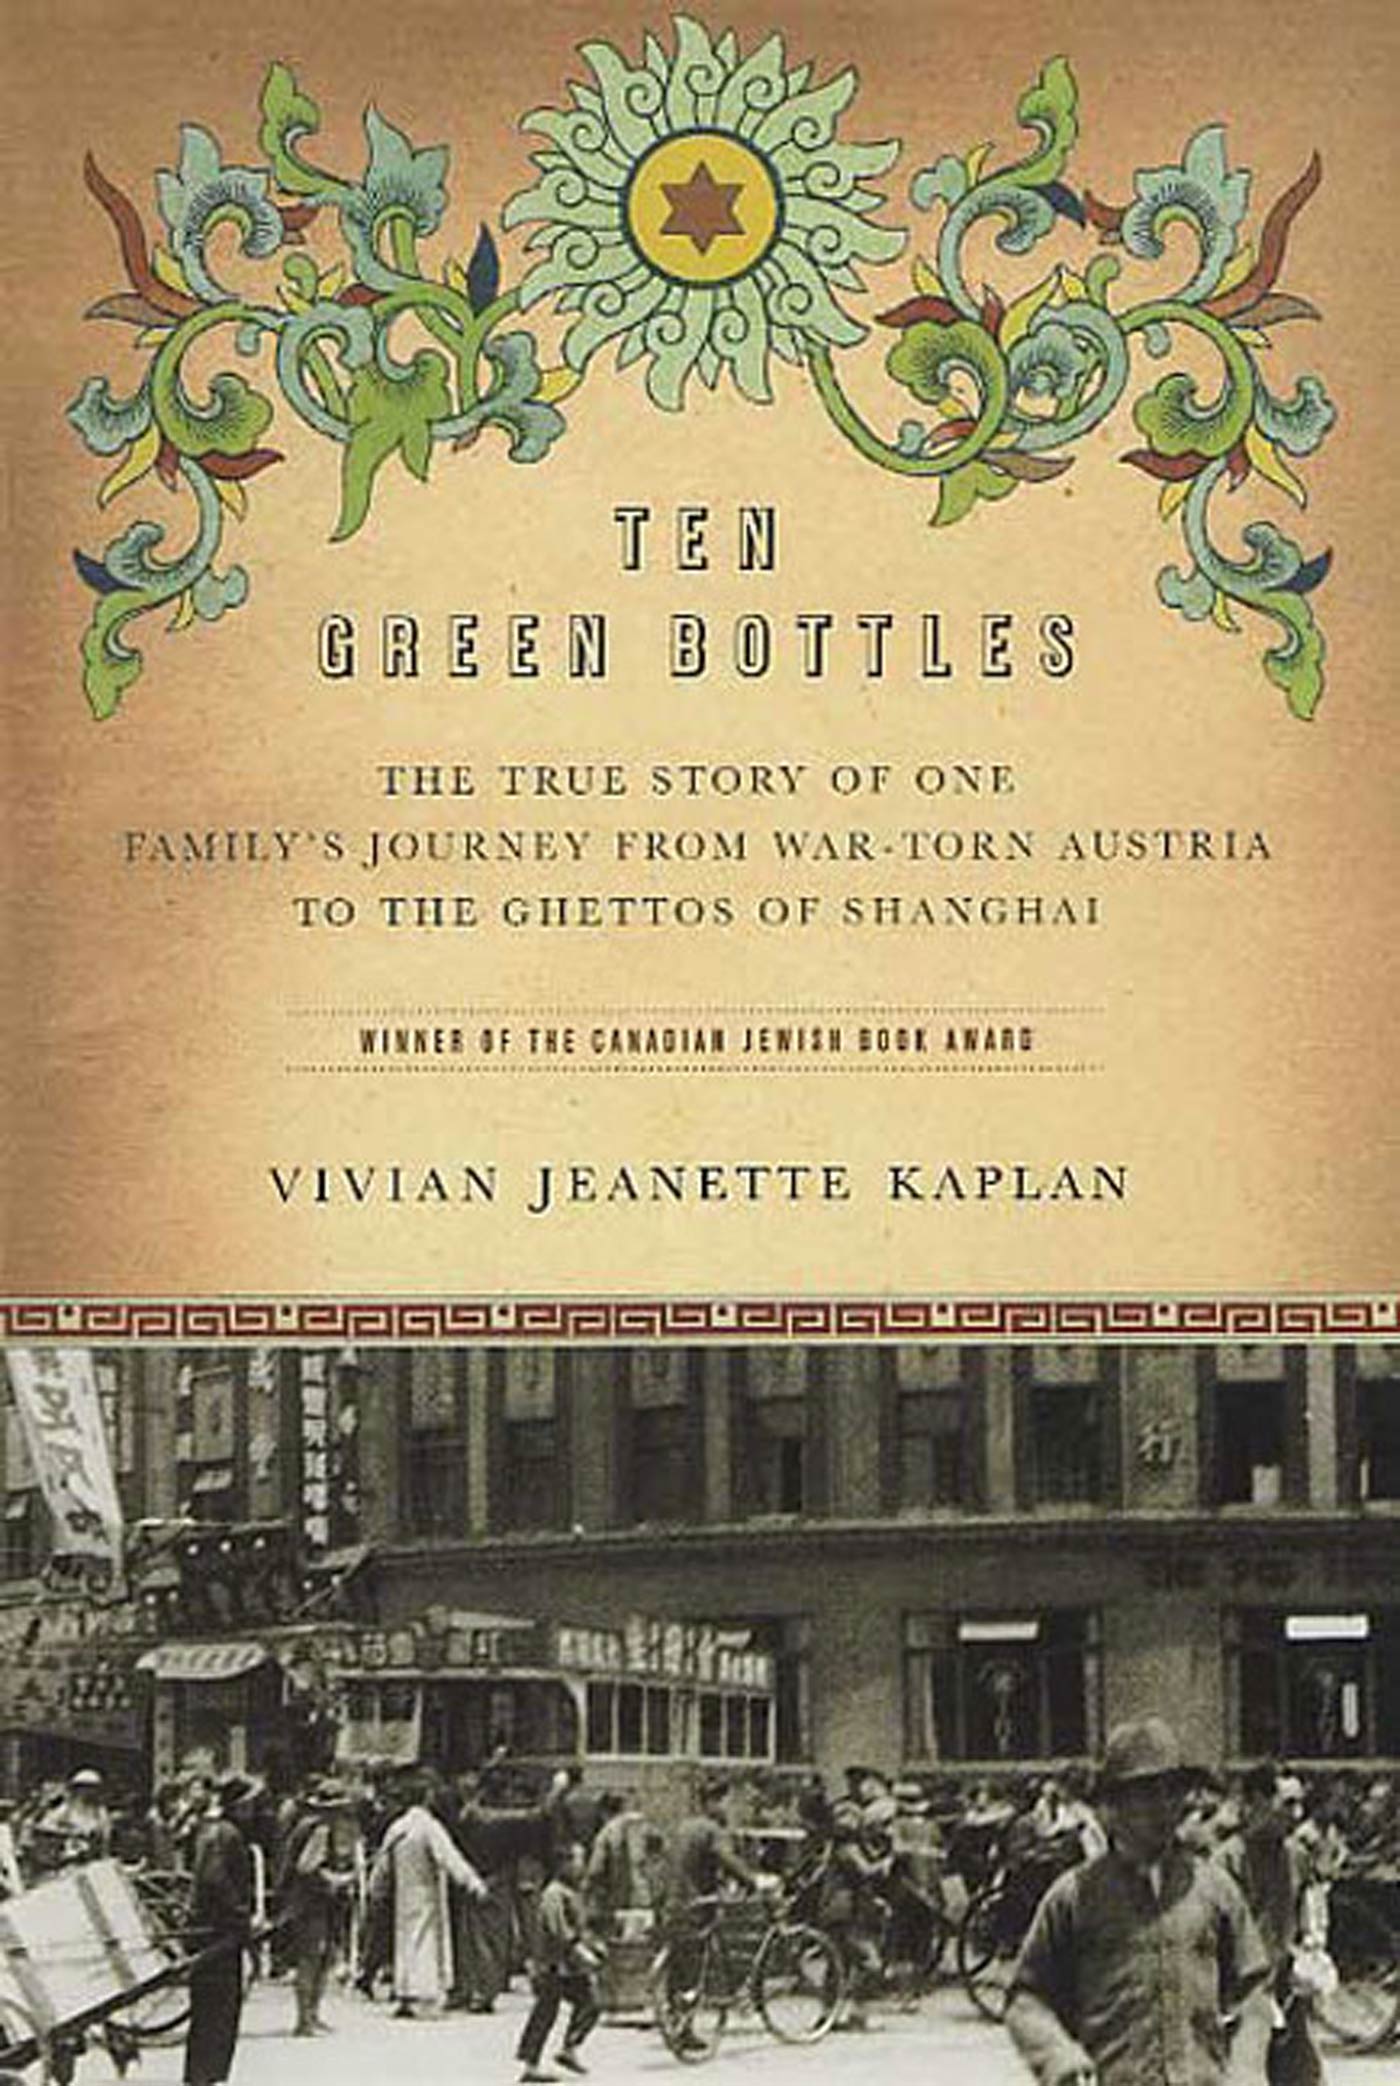 Ten Green Bottles The True Story of One Family's Journey from War-torn Austria to the Ghettos of Shanghai cover image